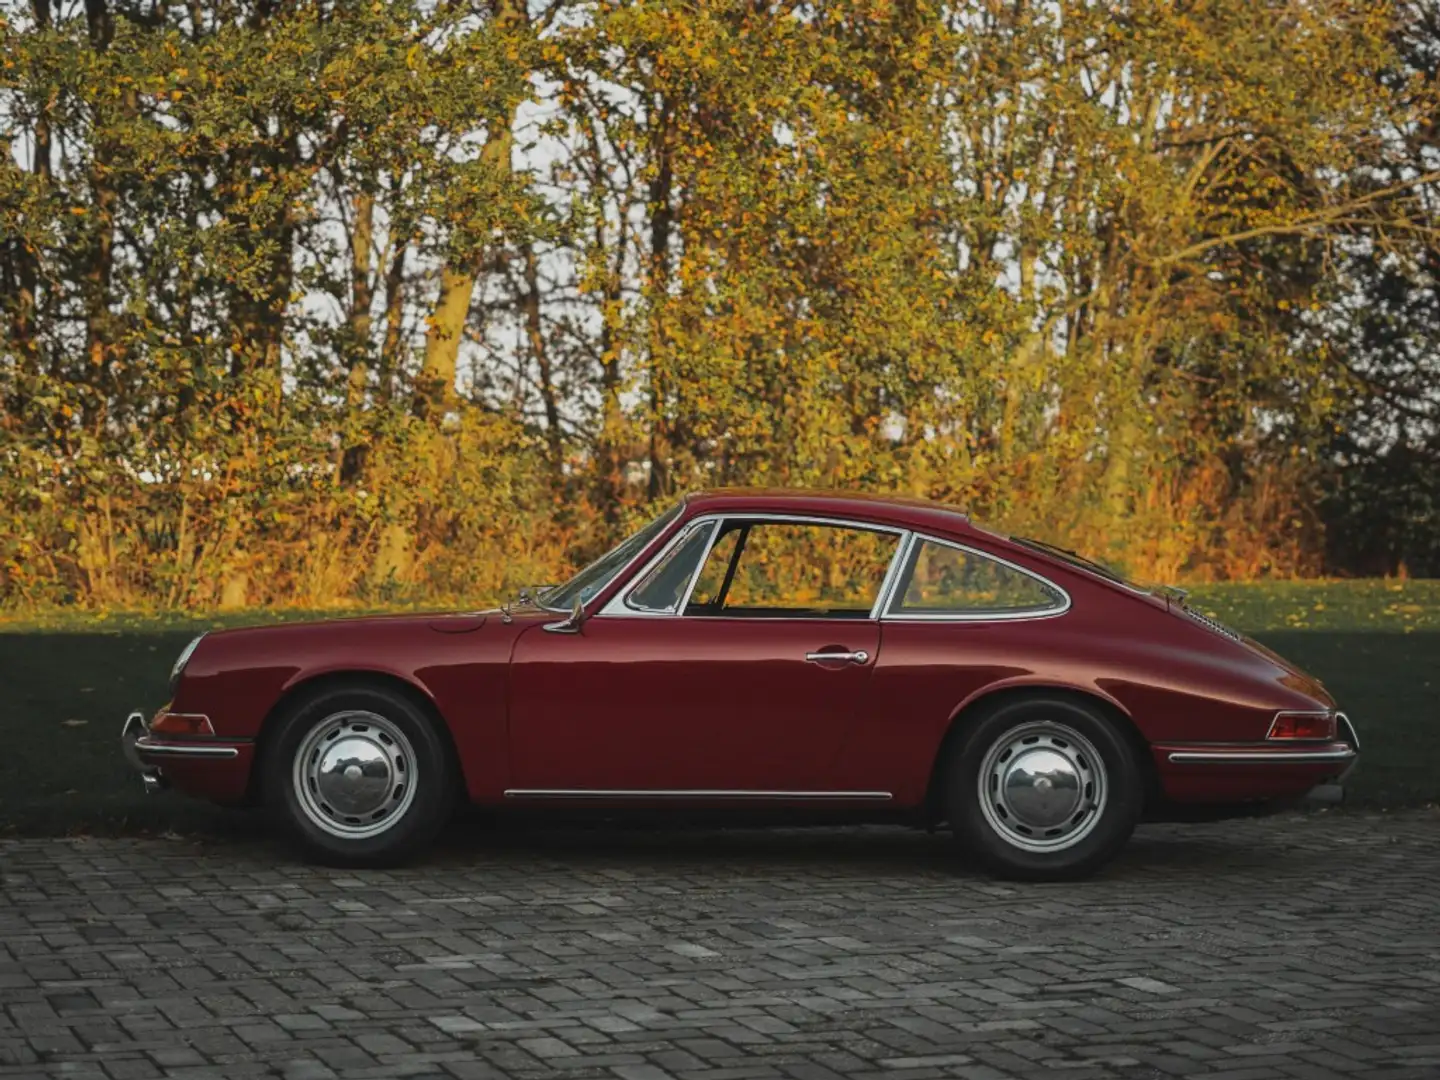 Porsche 911 1965 911 Coupe Matching numbers early chassis numb Kırmızı - 2